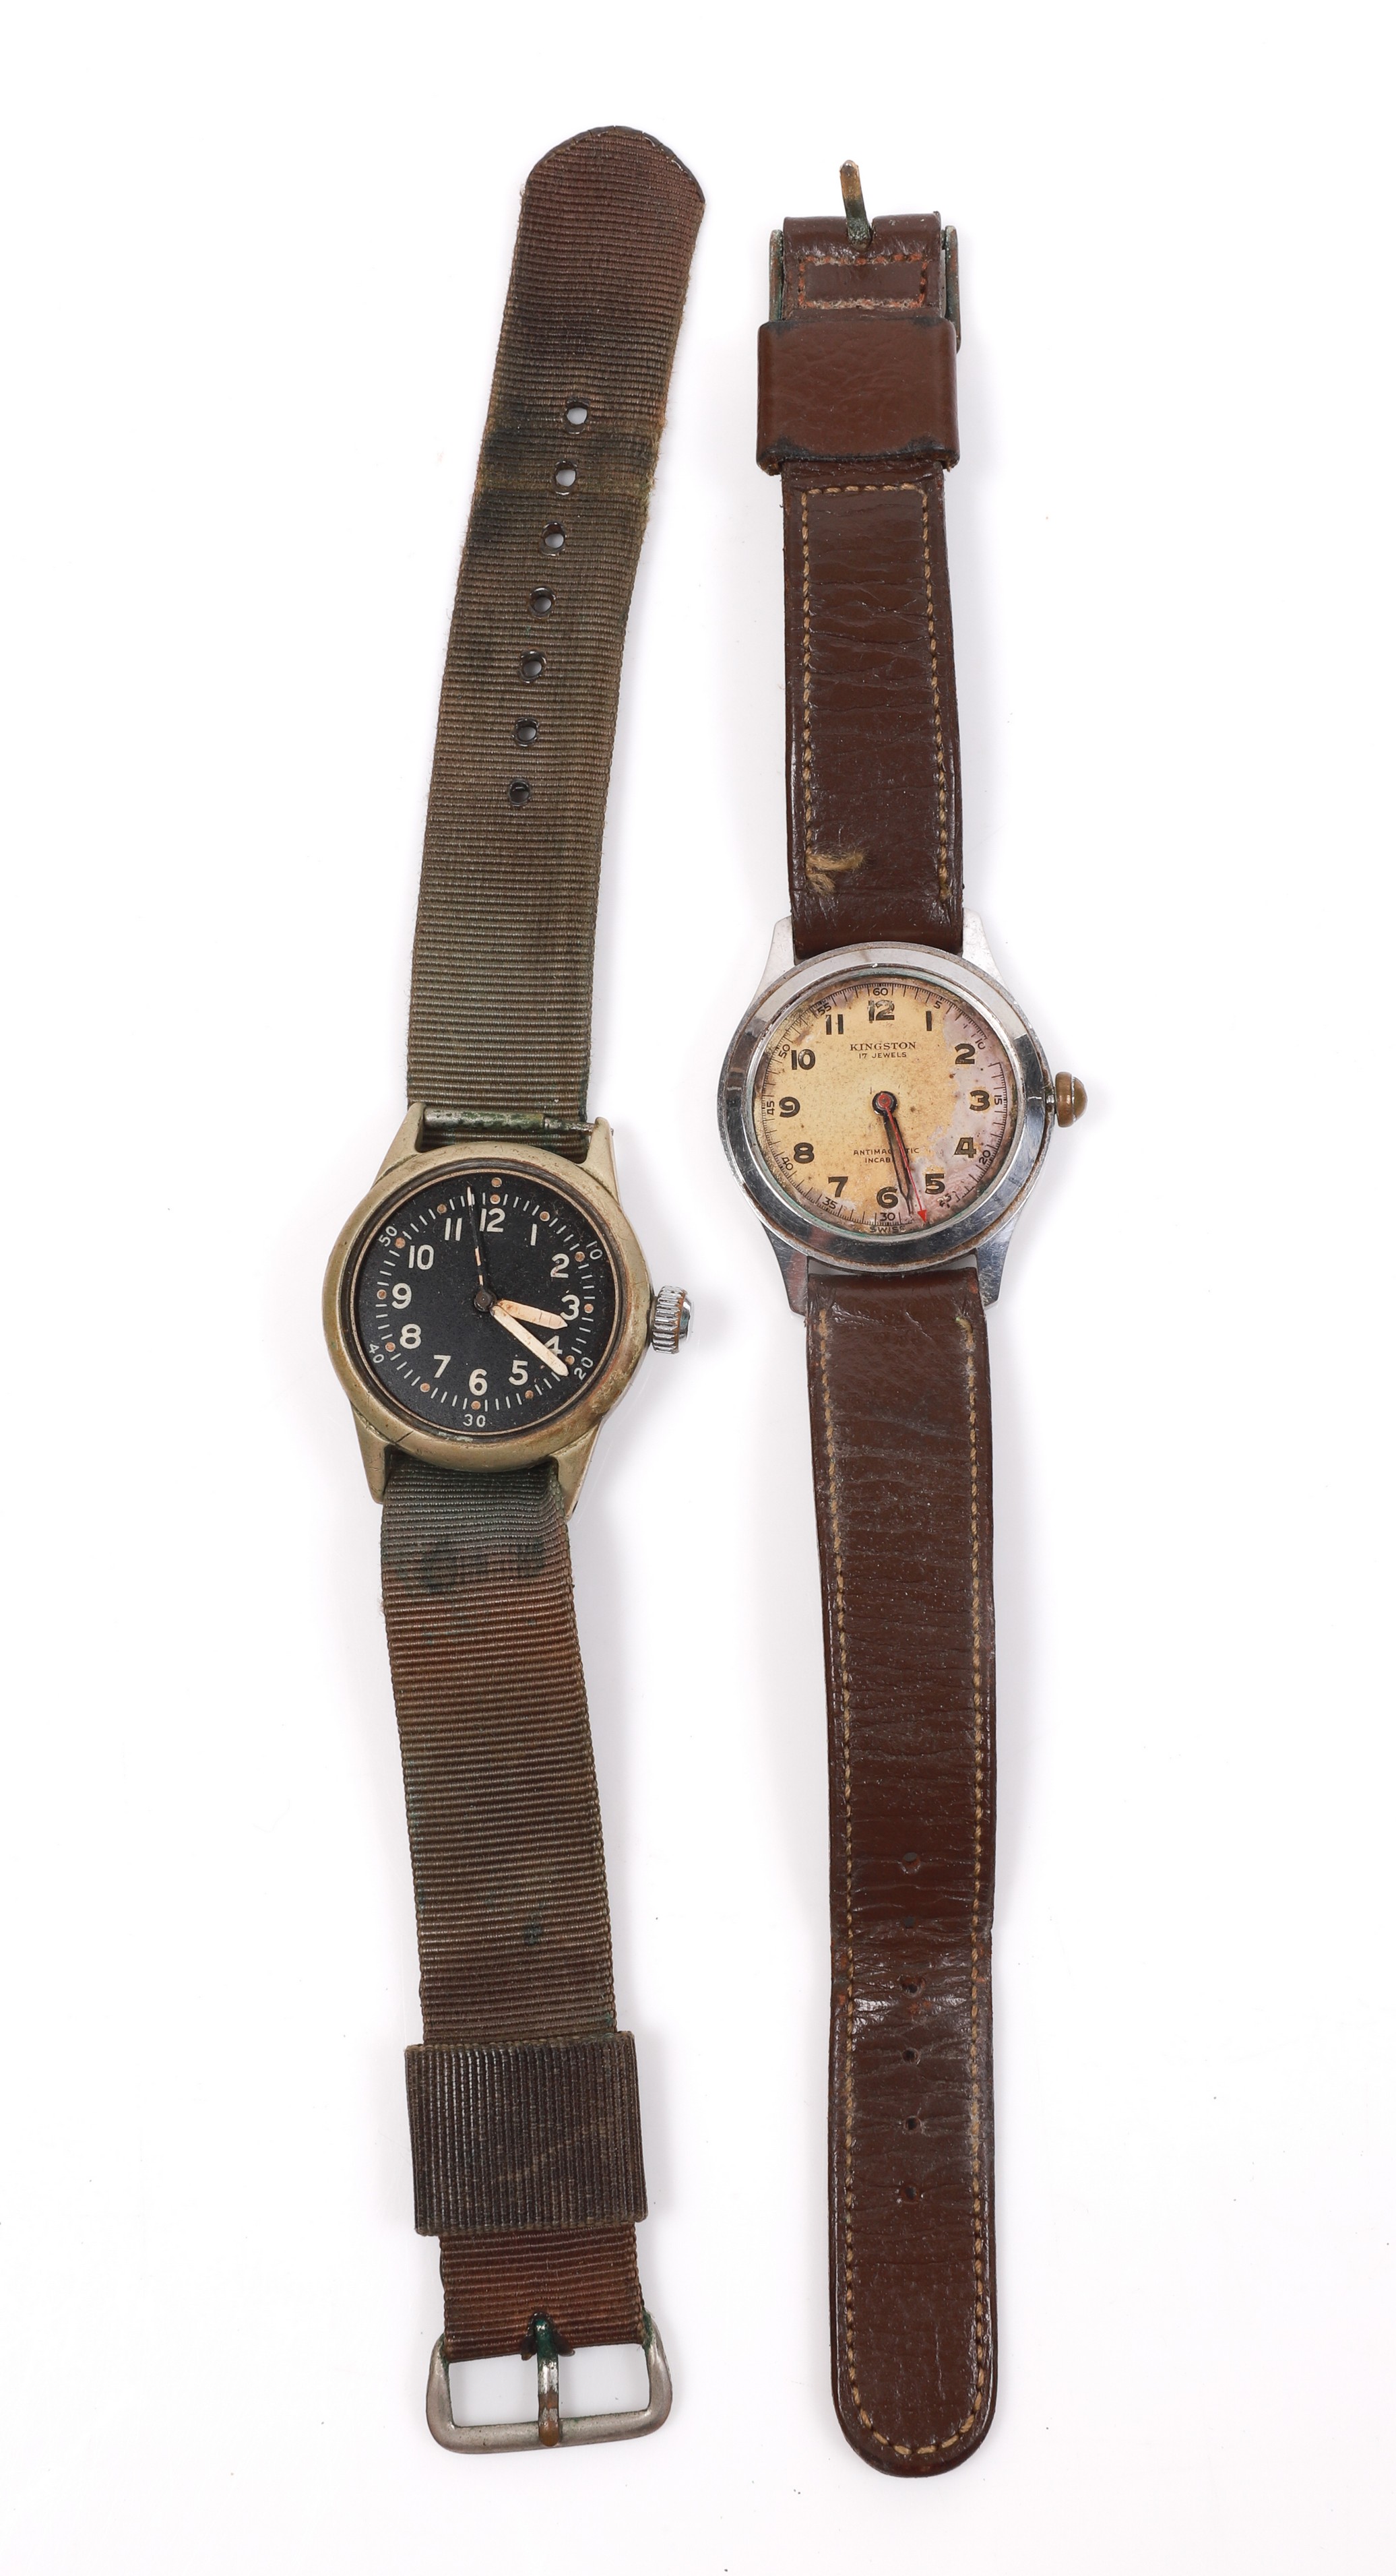  2 Watches to include fssc 88 w 800 3b4d33